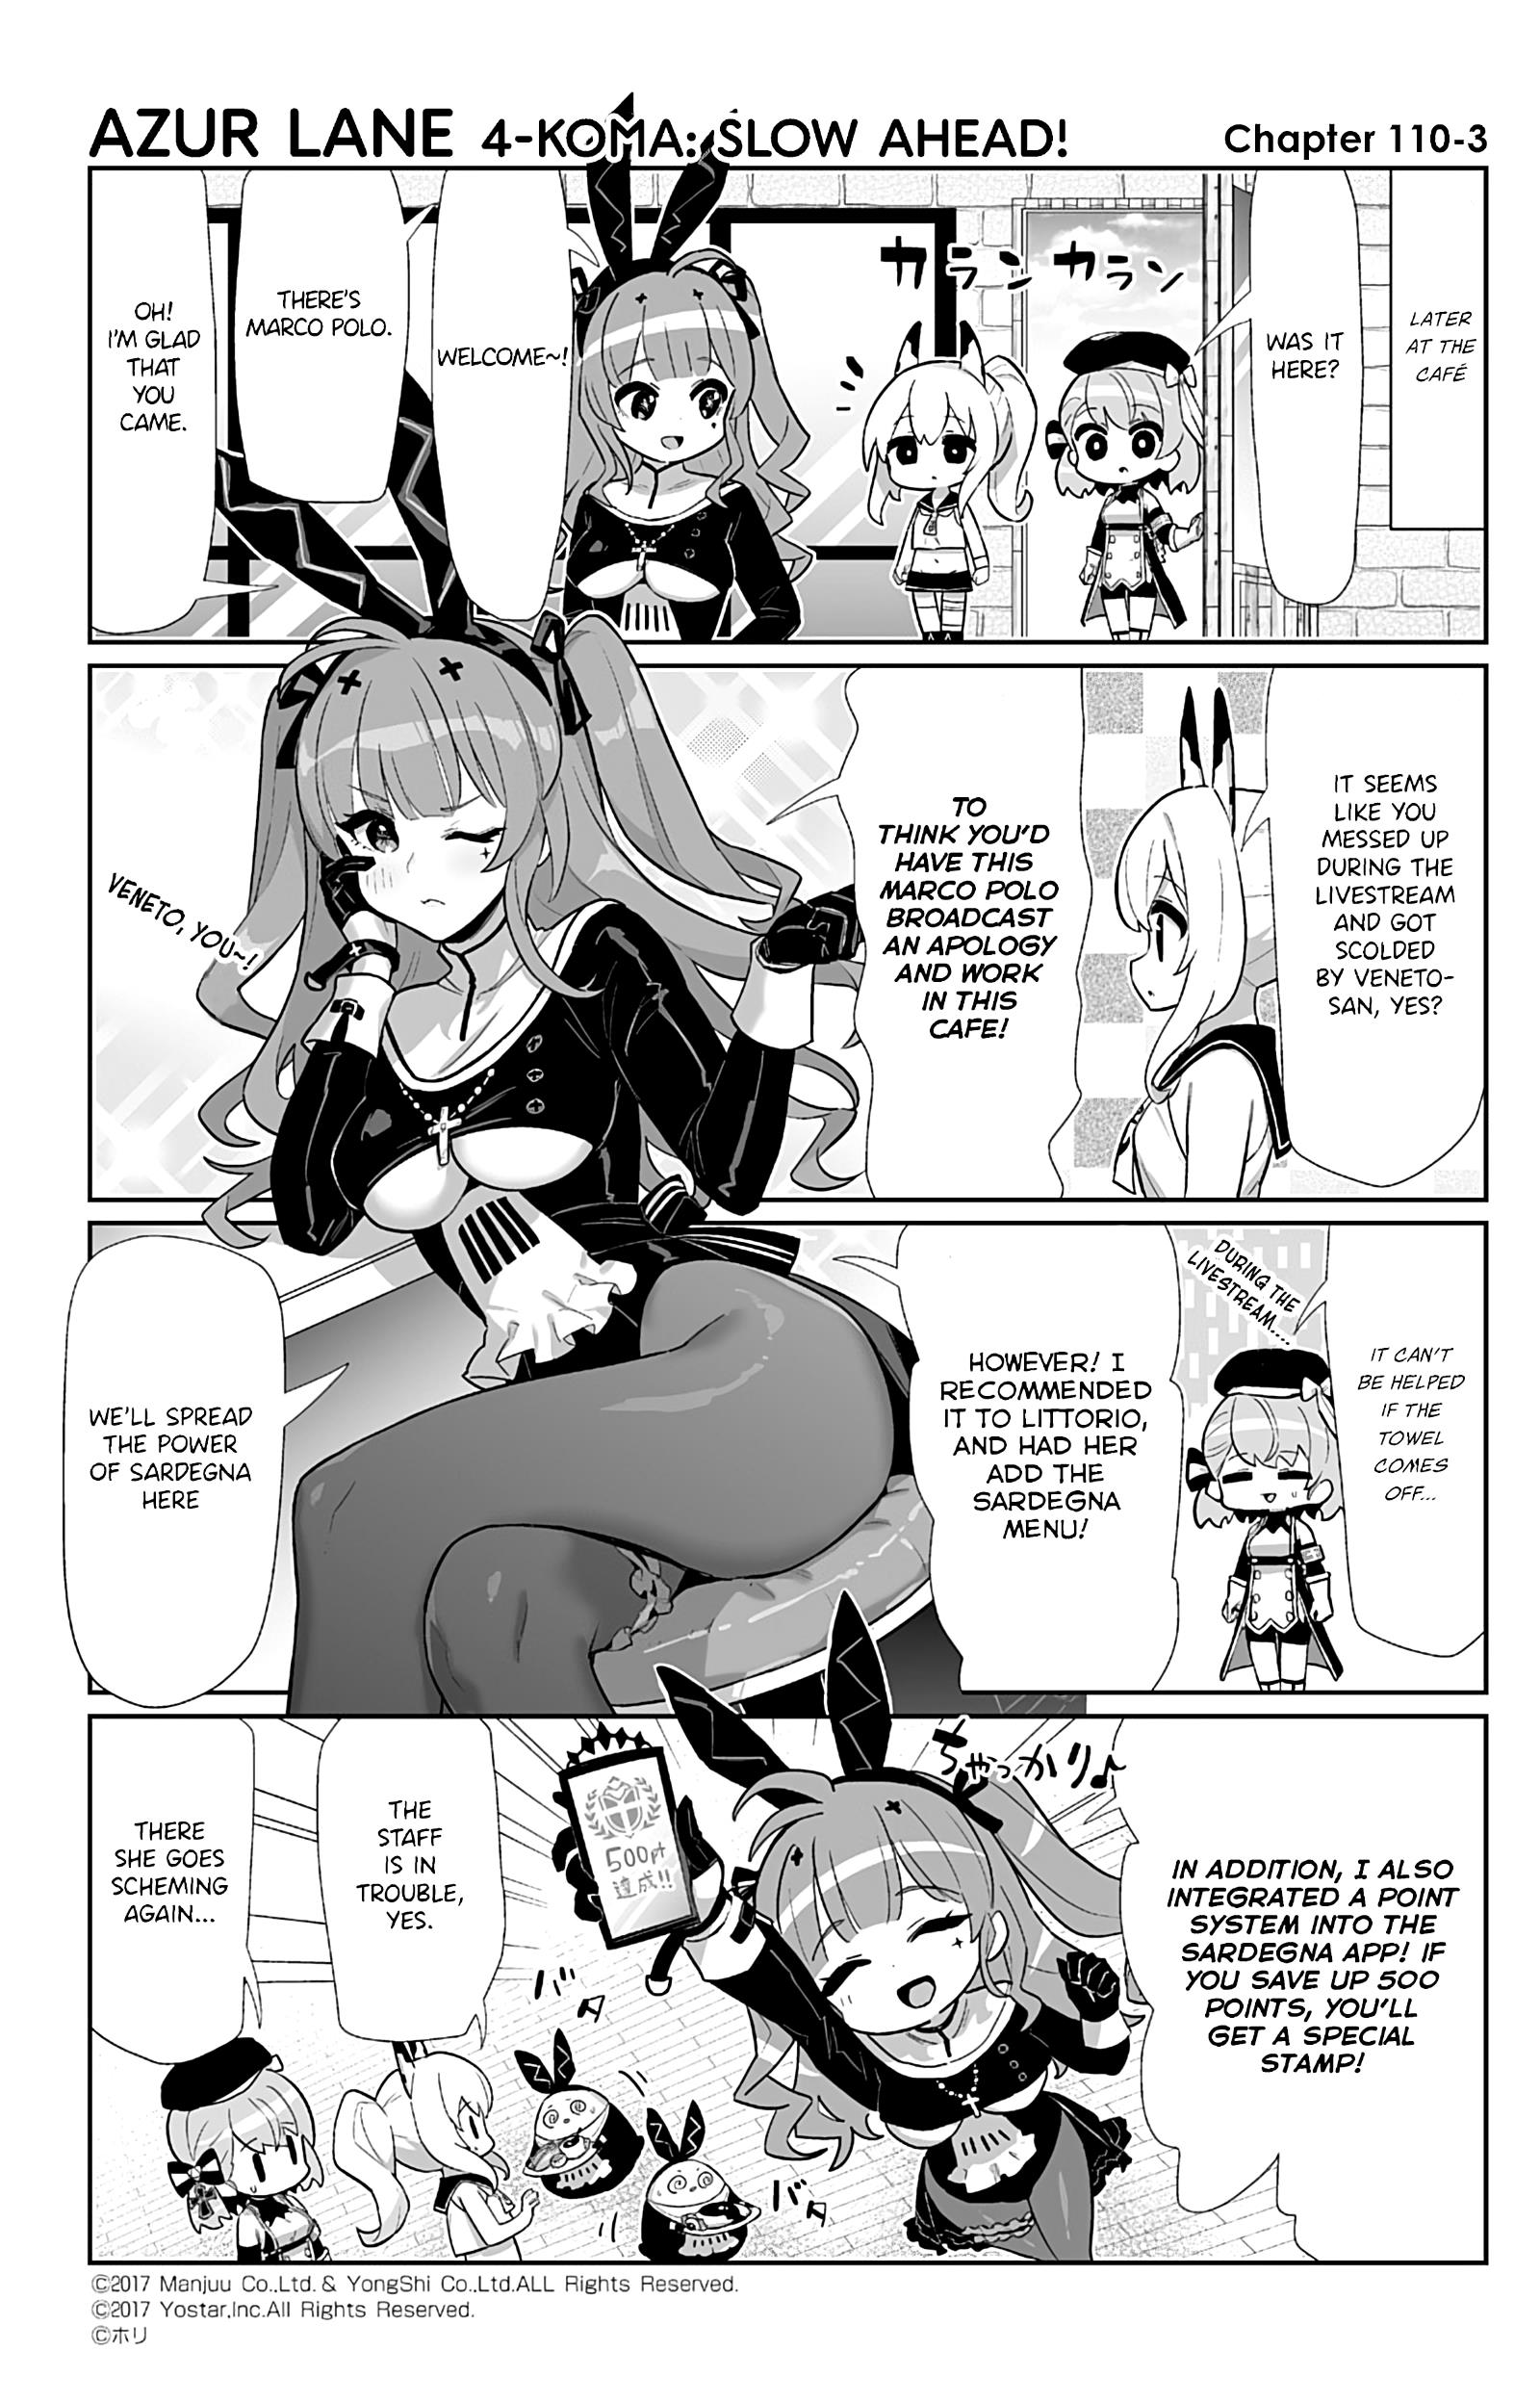 Azur Lane 4-Koma: Slow Ahead Chapter 110: Marco Polo - Picture 3